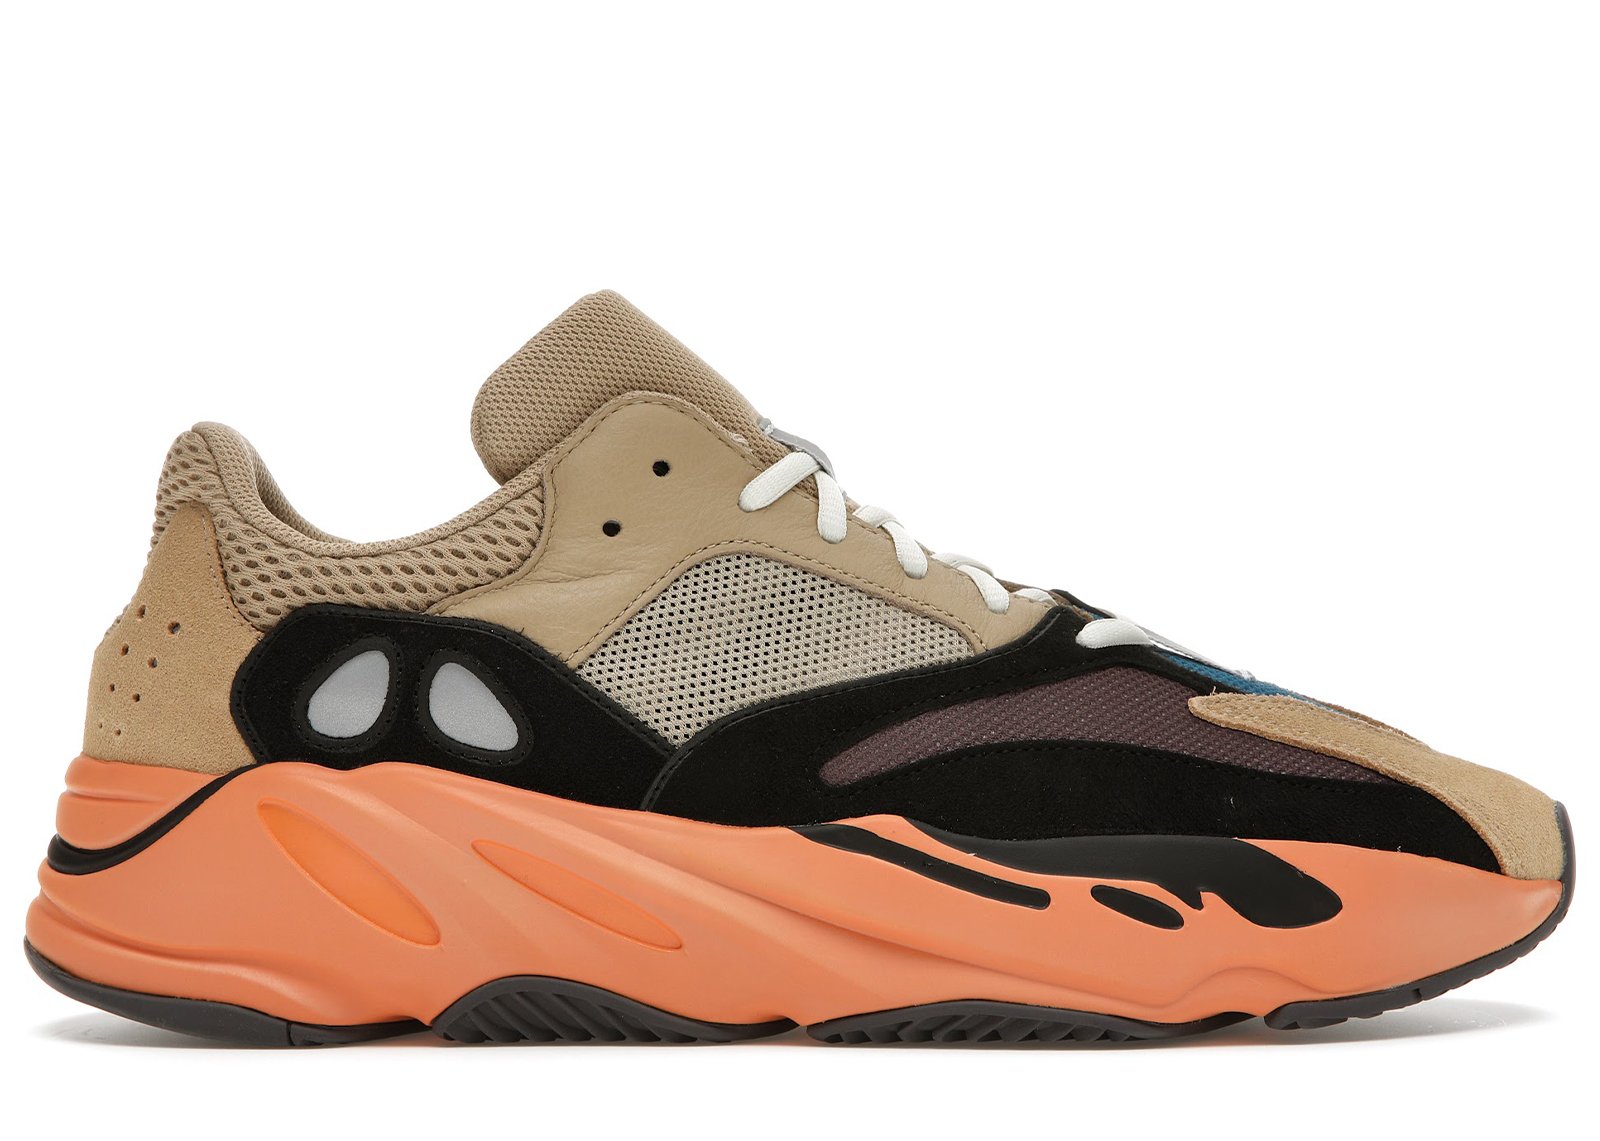 adidas Yeezy Boost 700 Enflame Amber sneakers